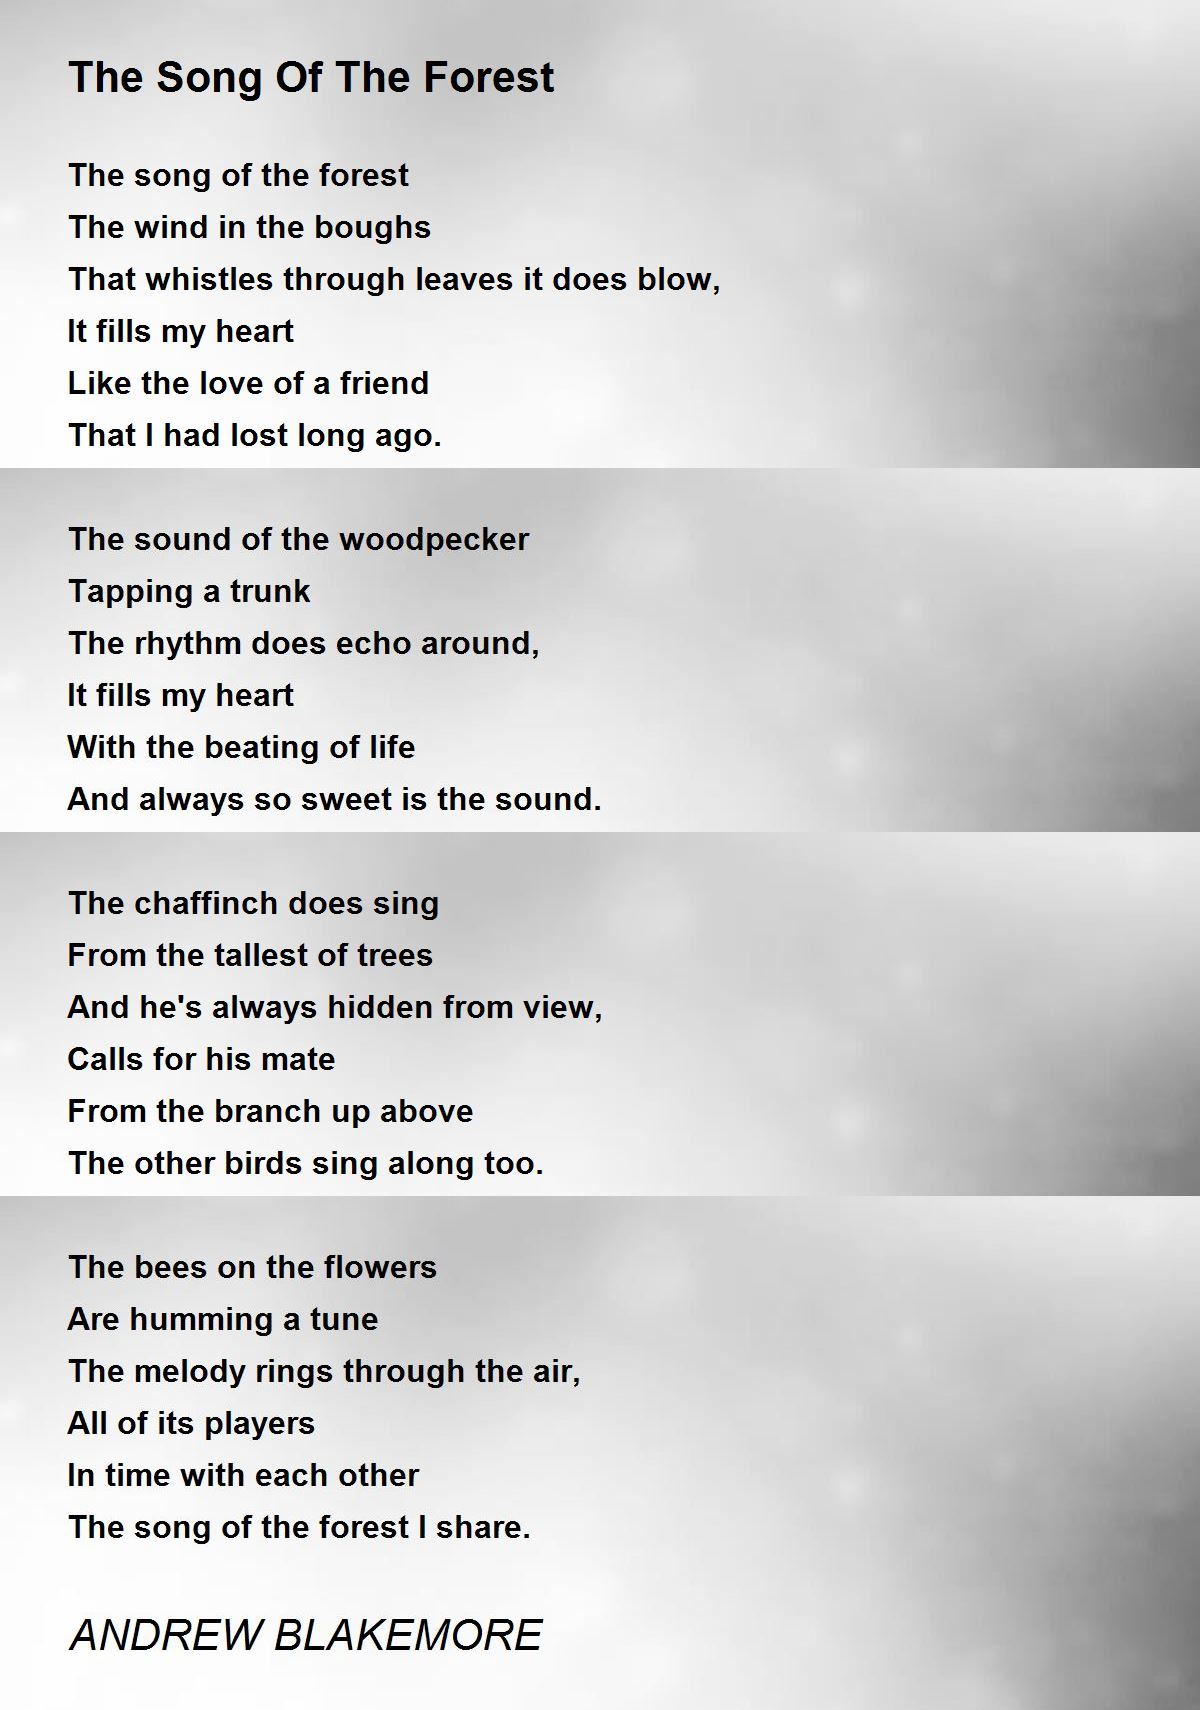 The Song Of The Forest - The Song Of The Forest Poem by ANDREW